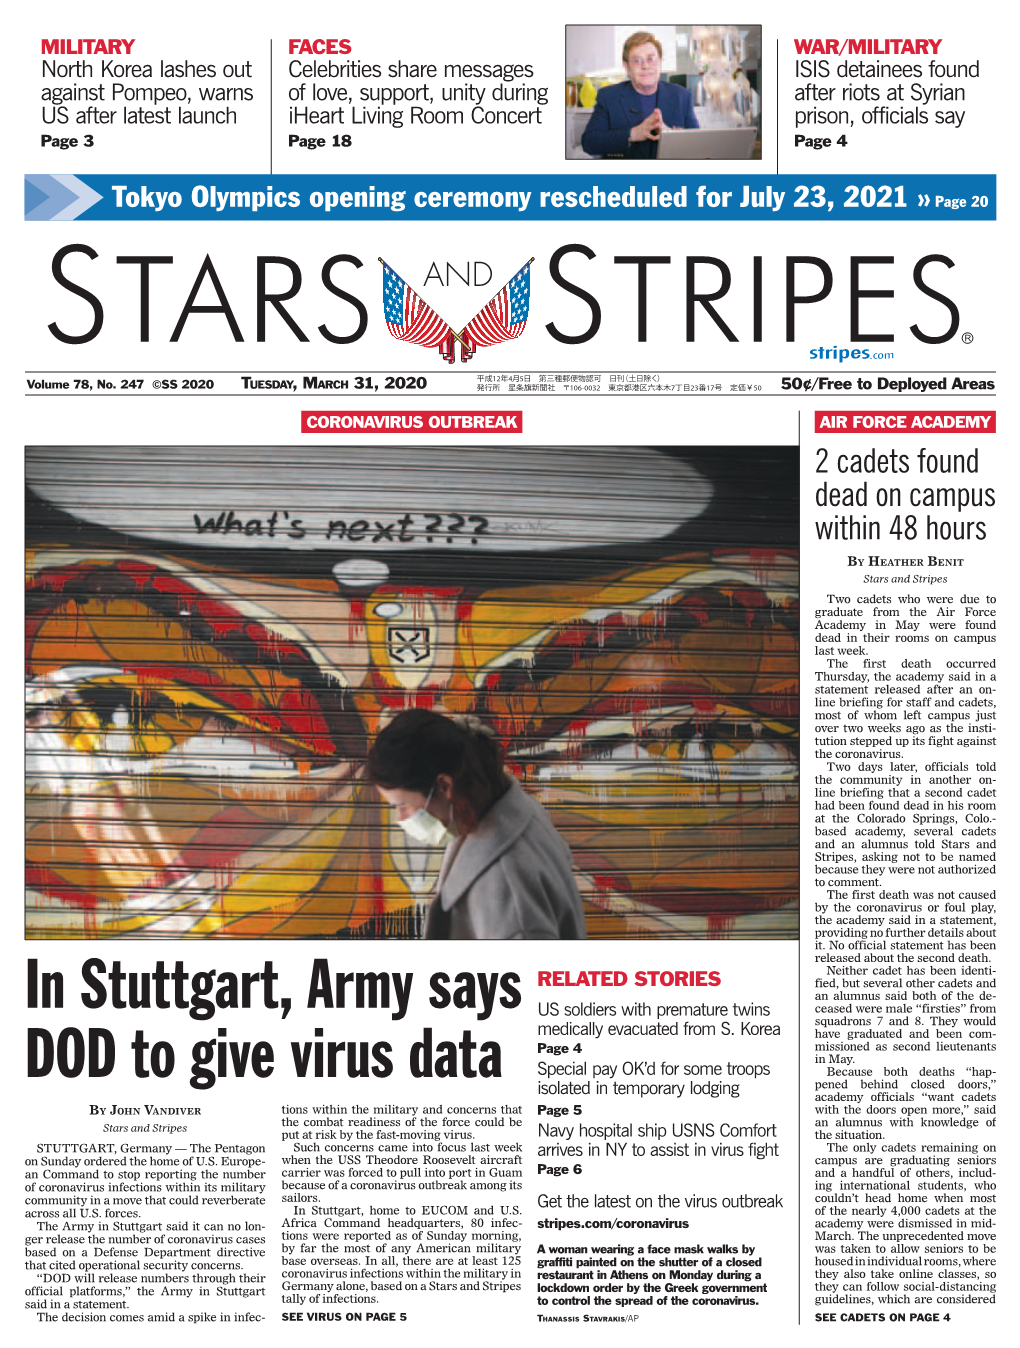 In Stuttgart, Army Says DOD to Give Virus Data